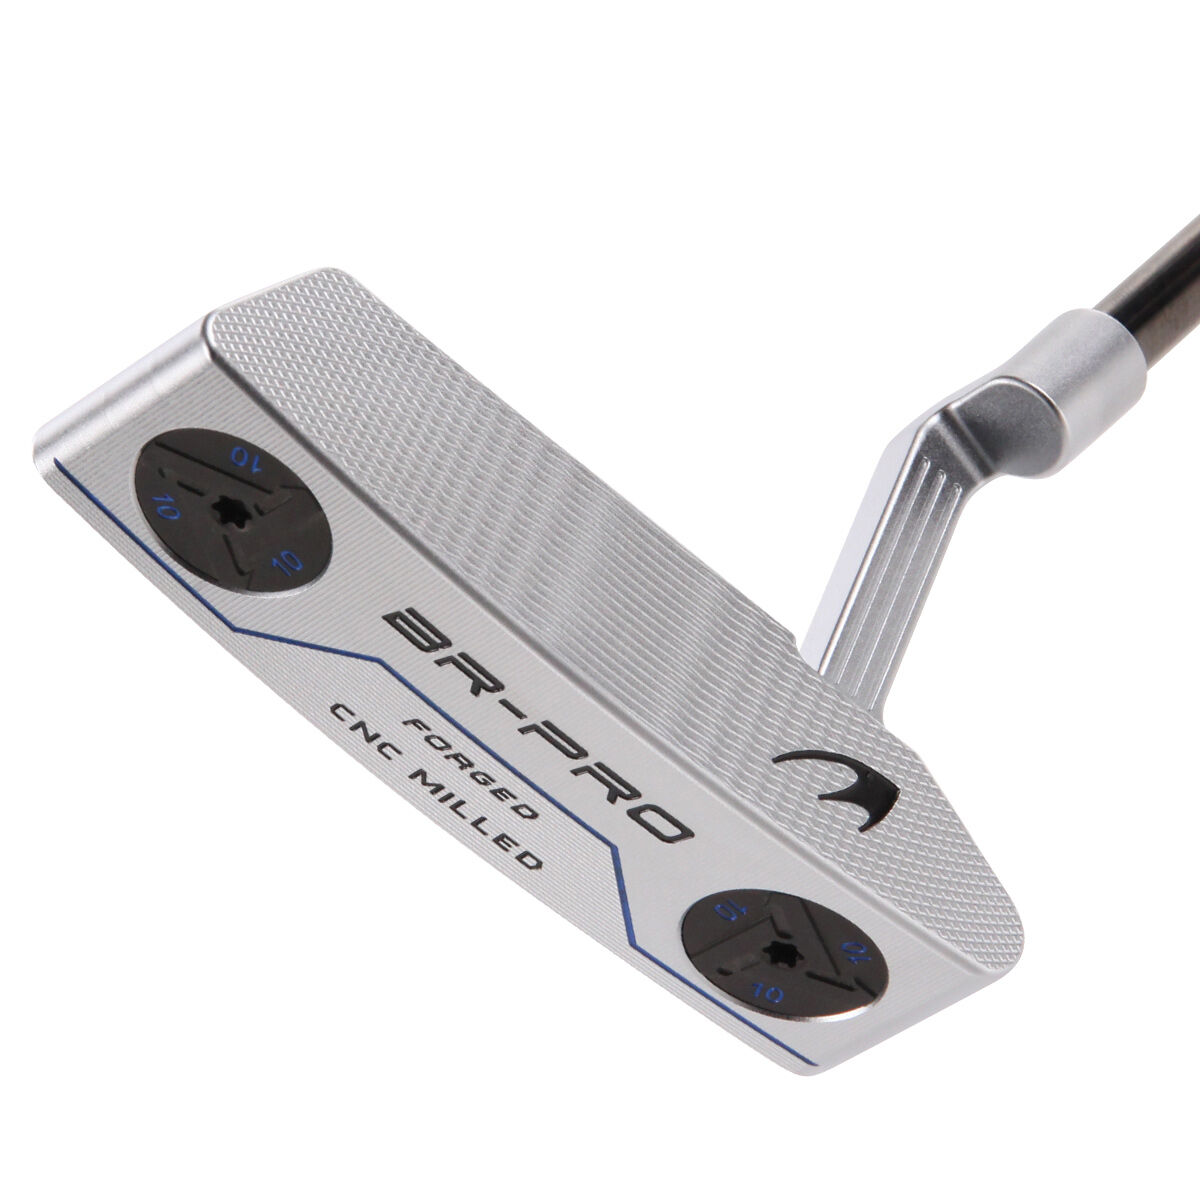 Benross Silver, Black Br-Pro Milled Blade Golf Putter, Right Hand, Size: 34 inches | American Golf